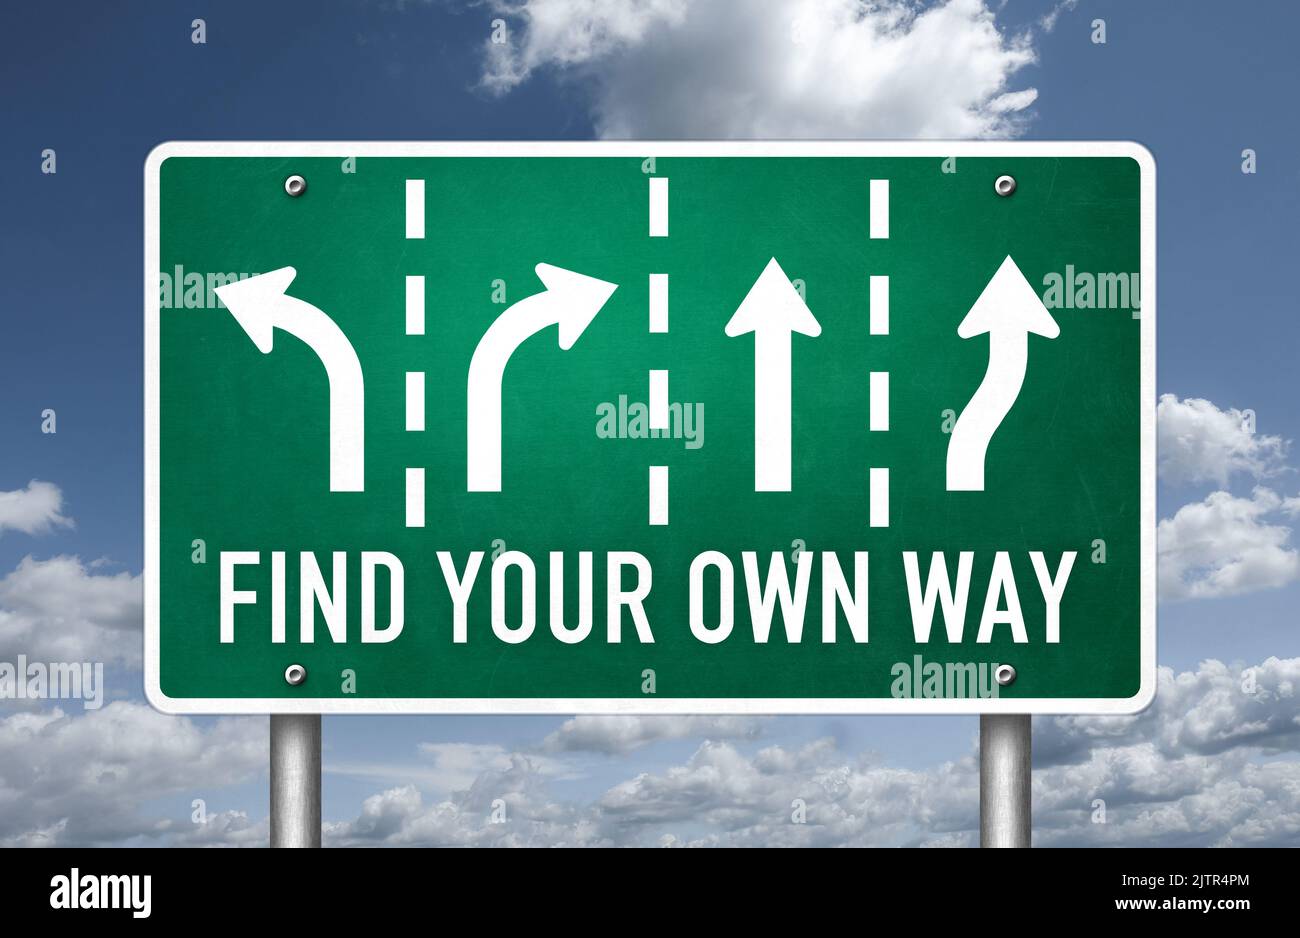 Find your own way - roadsign message Stock Photo